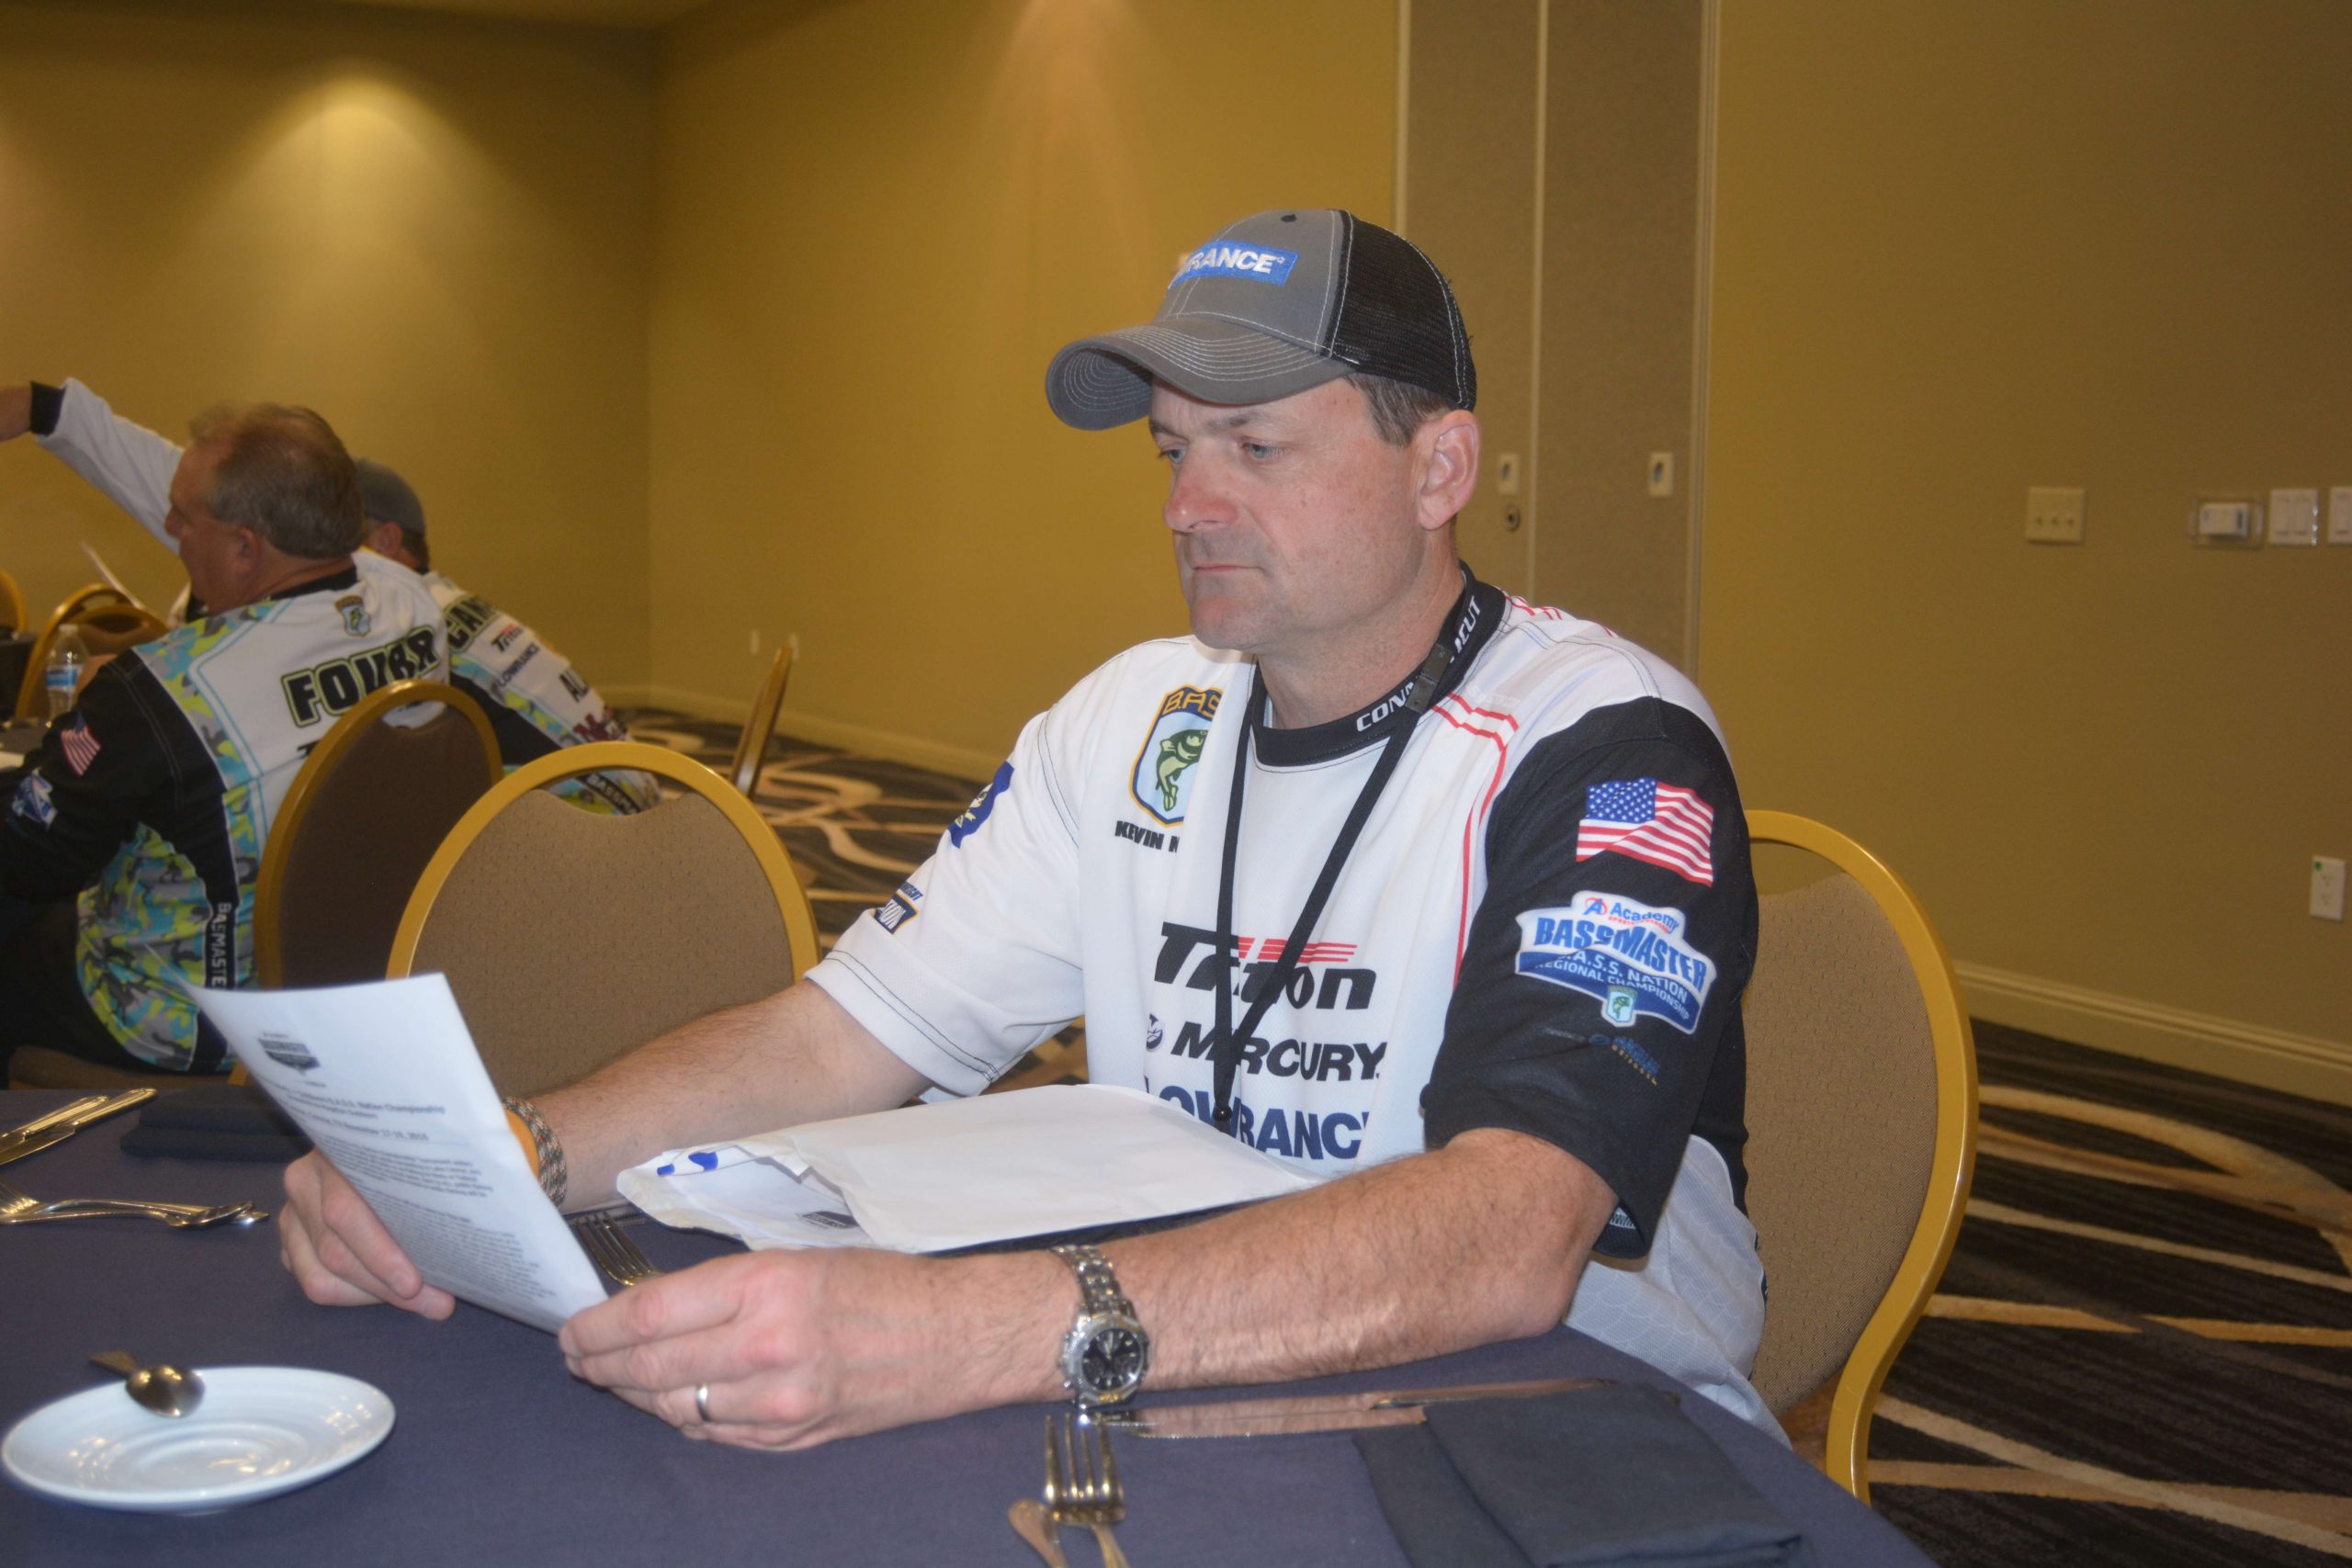 Kevin Noel of Connecticut studies hard before the briefing begins for his first Nation Championship.